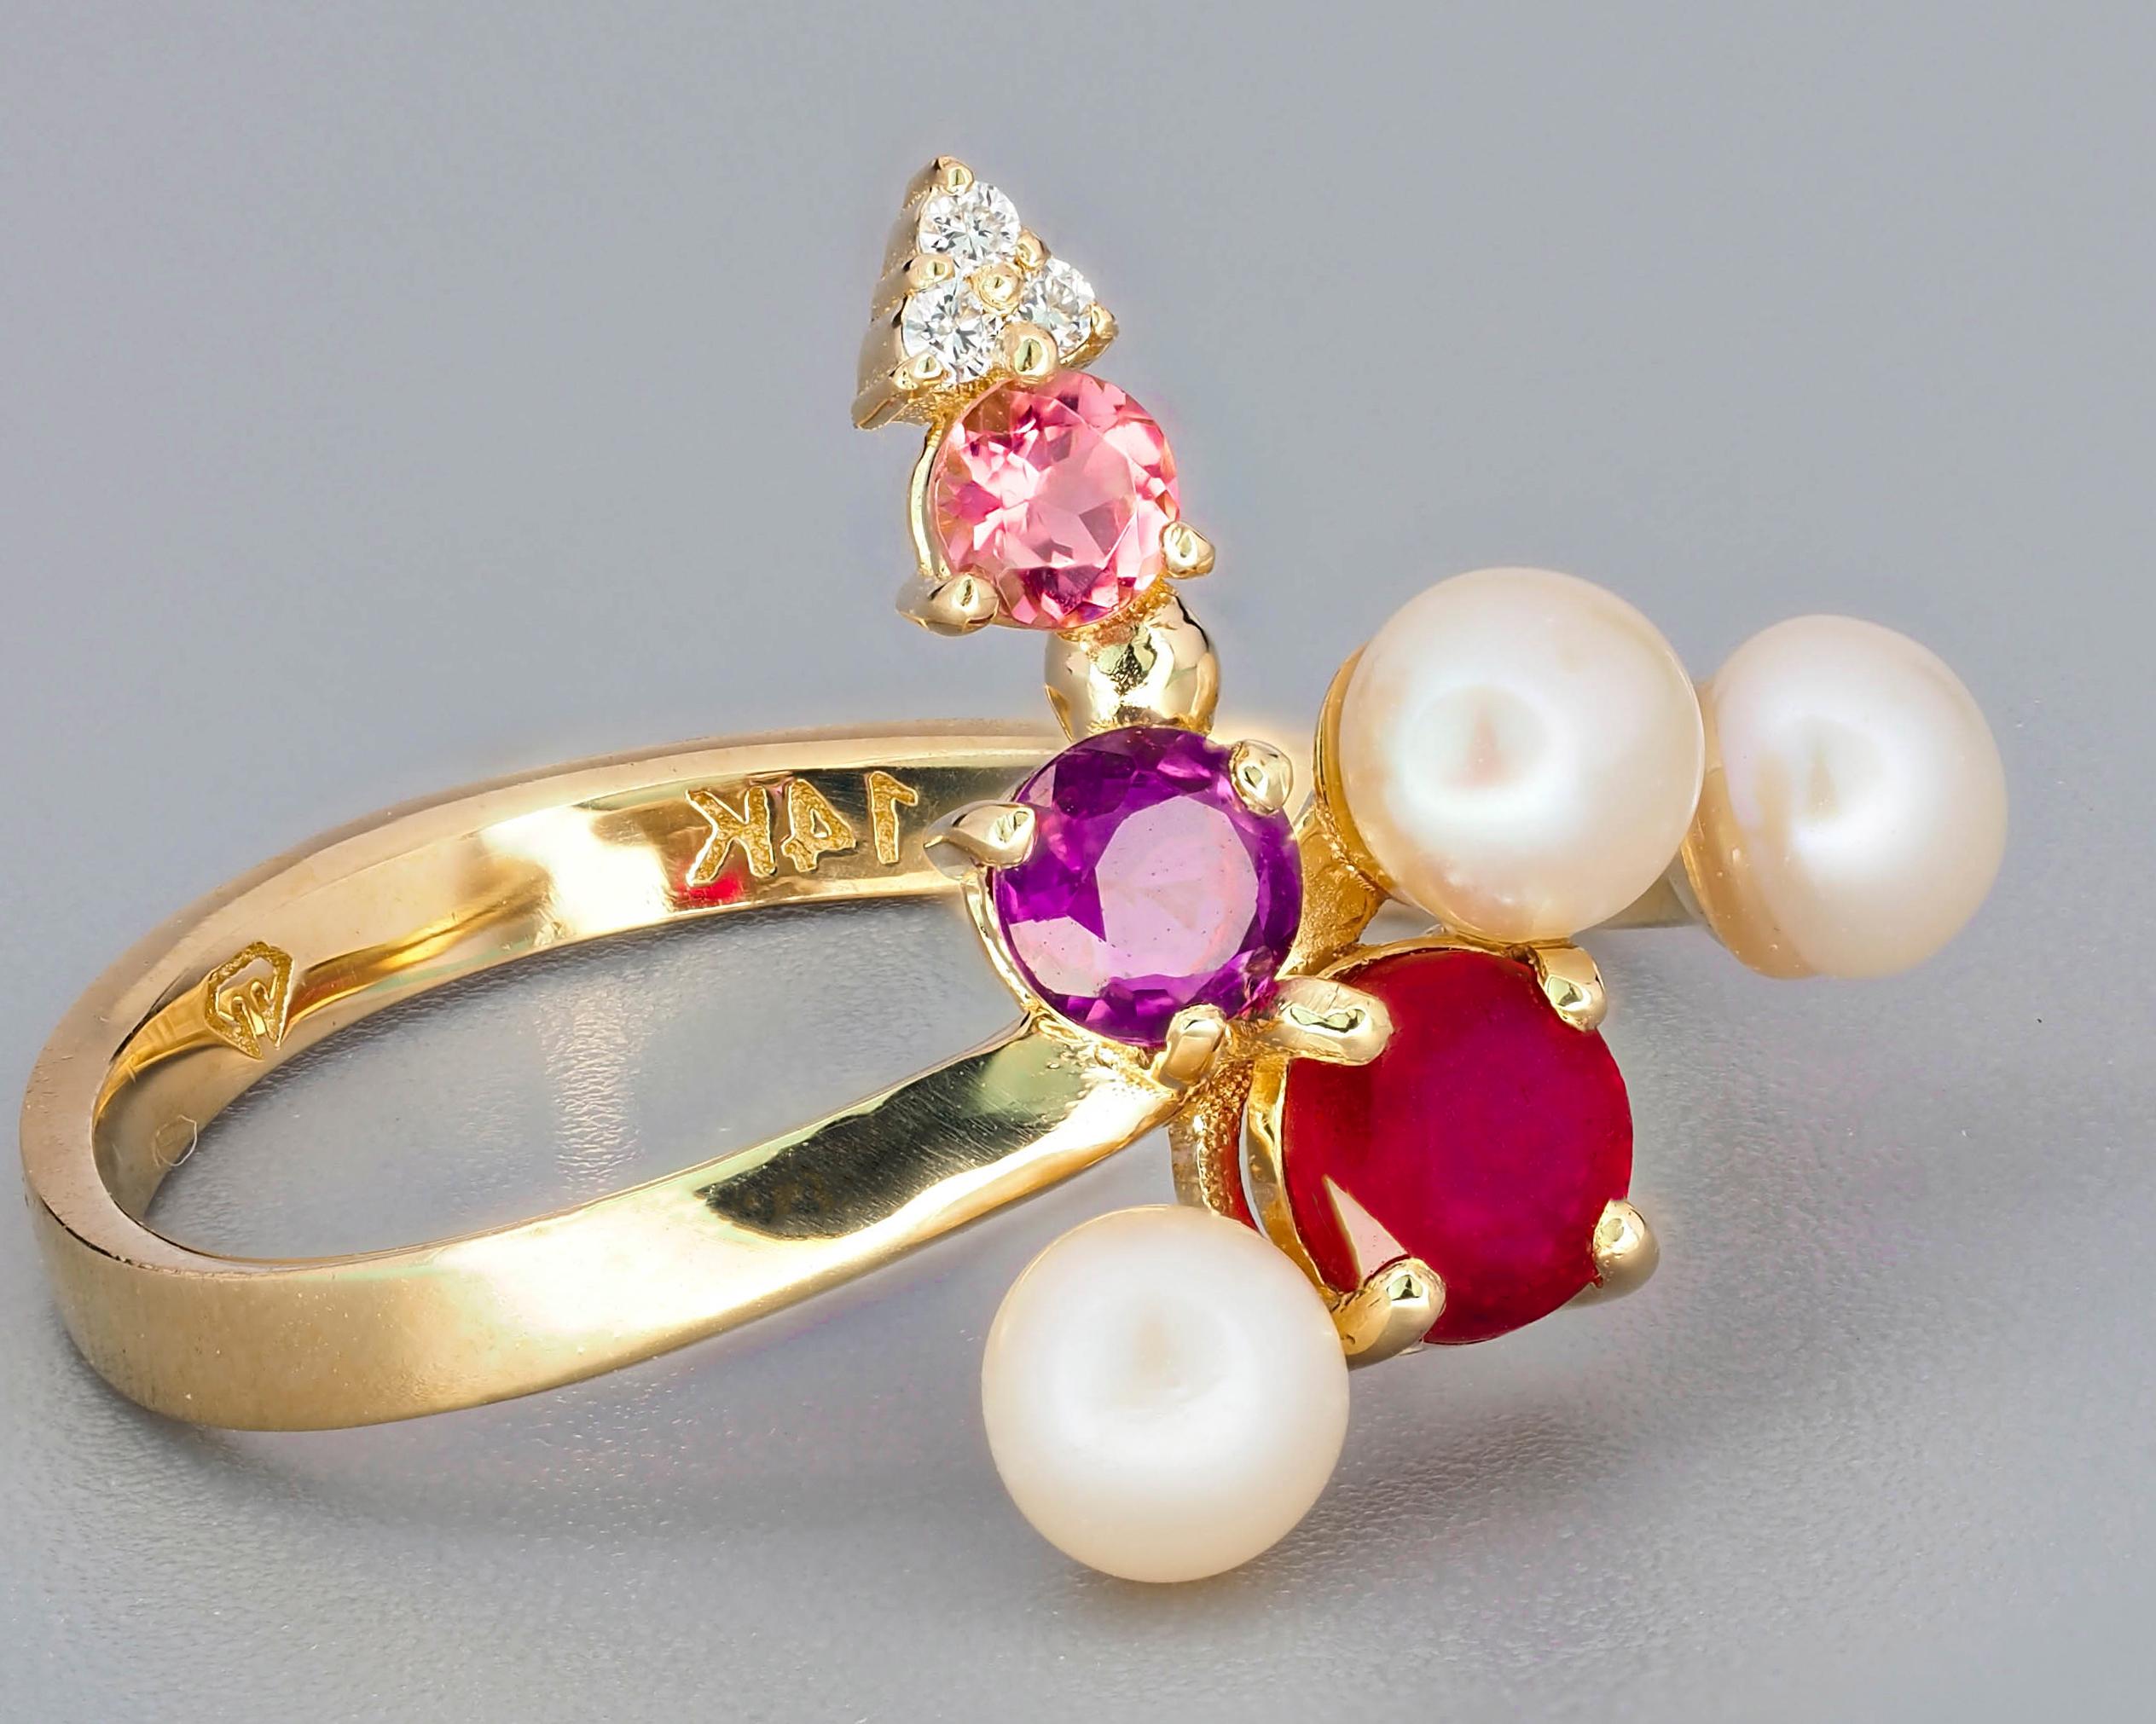 For Sale:   Ruby and multicolored gemstones ring in 14k gold! 7